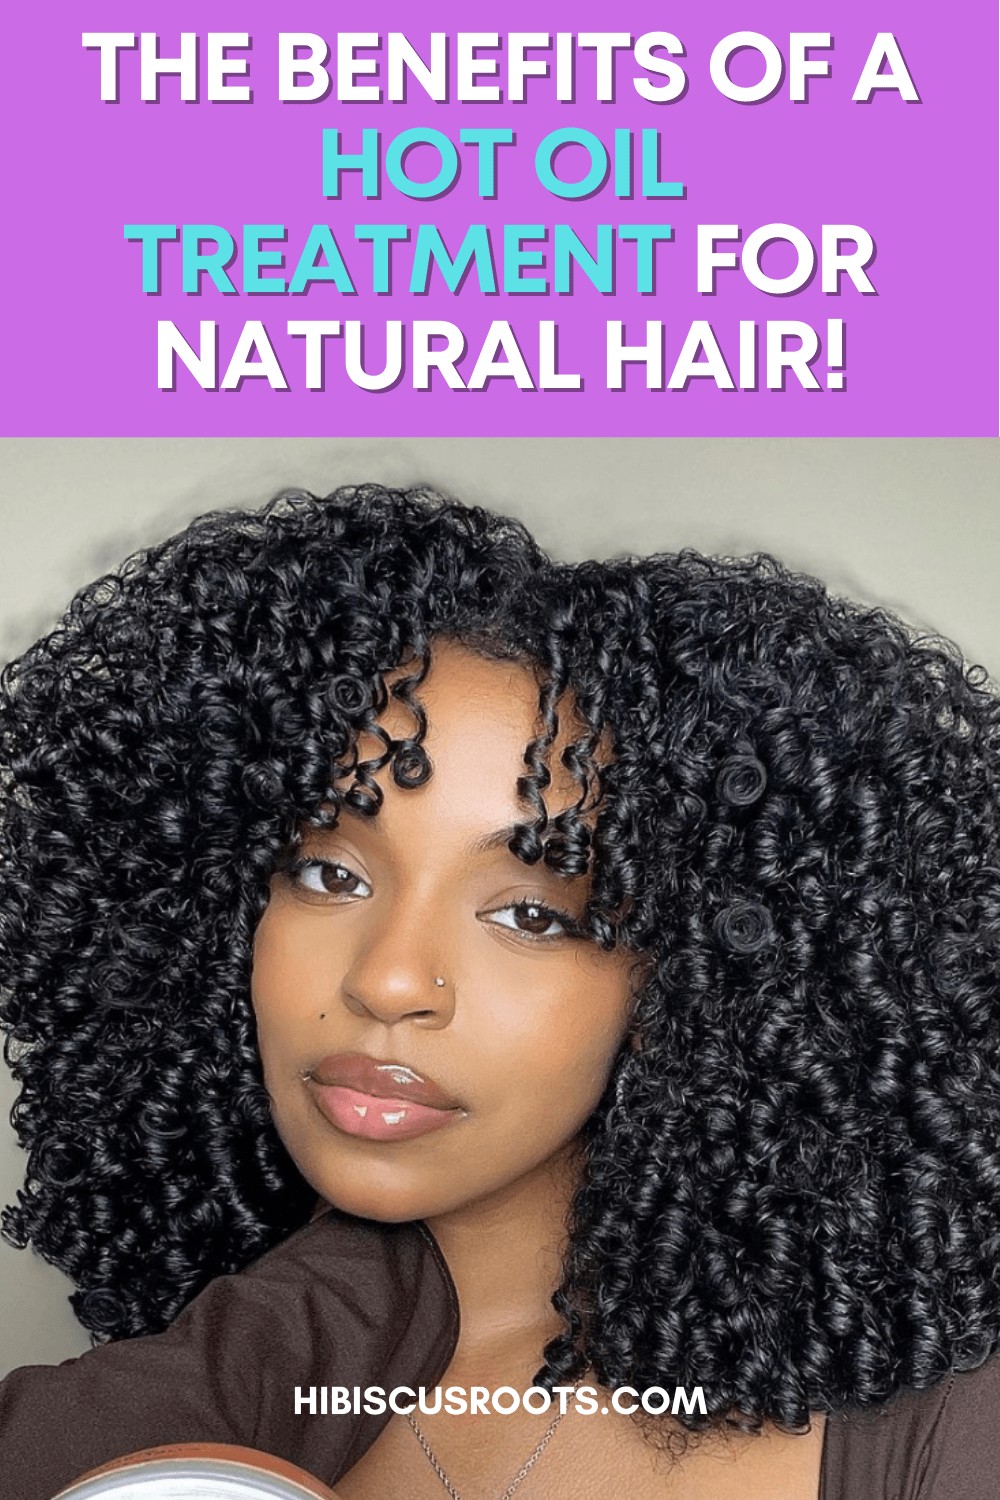 How to Do a Hot Oil Treatment on Wet or Dry Natural Hair!